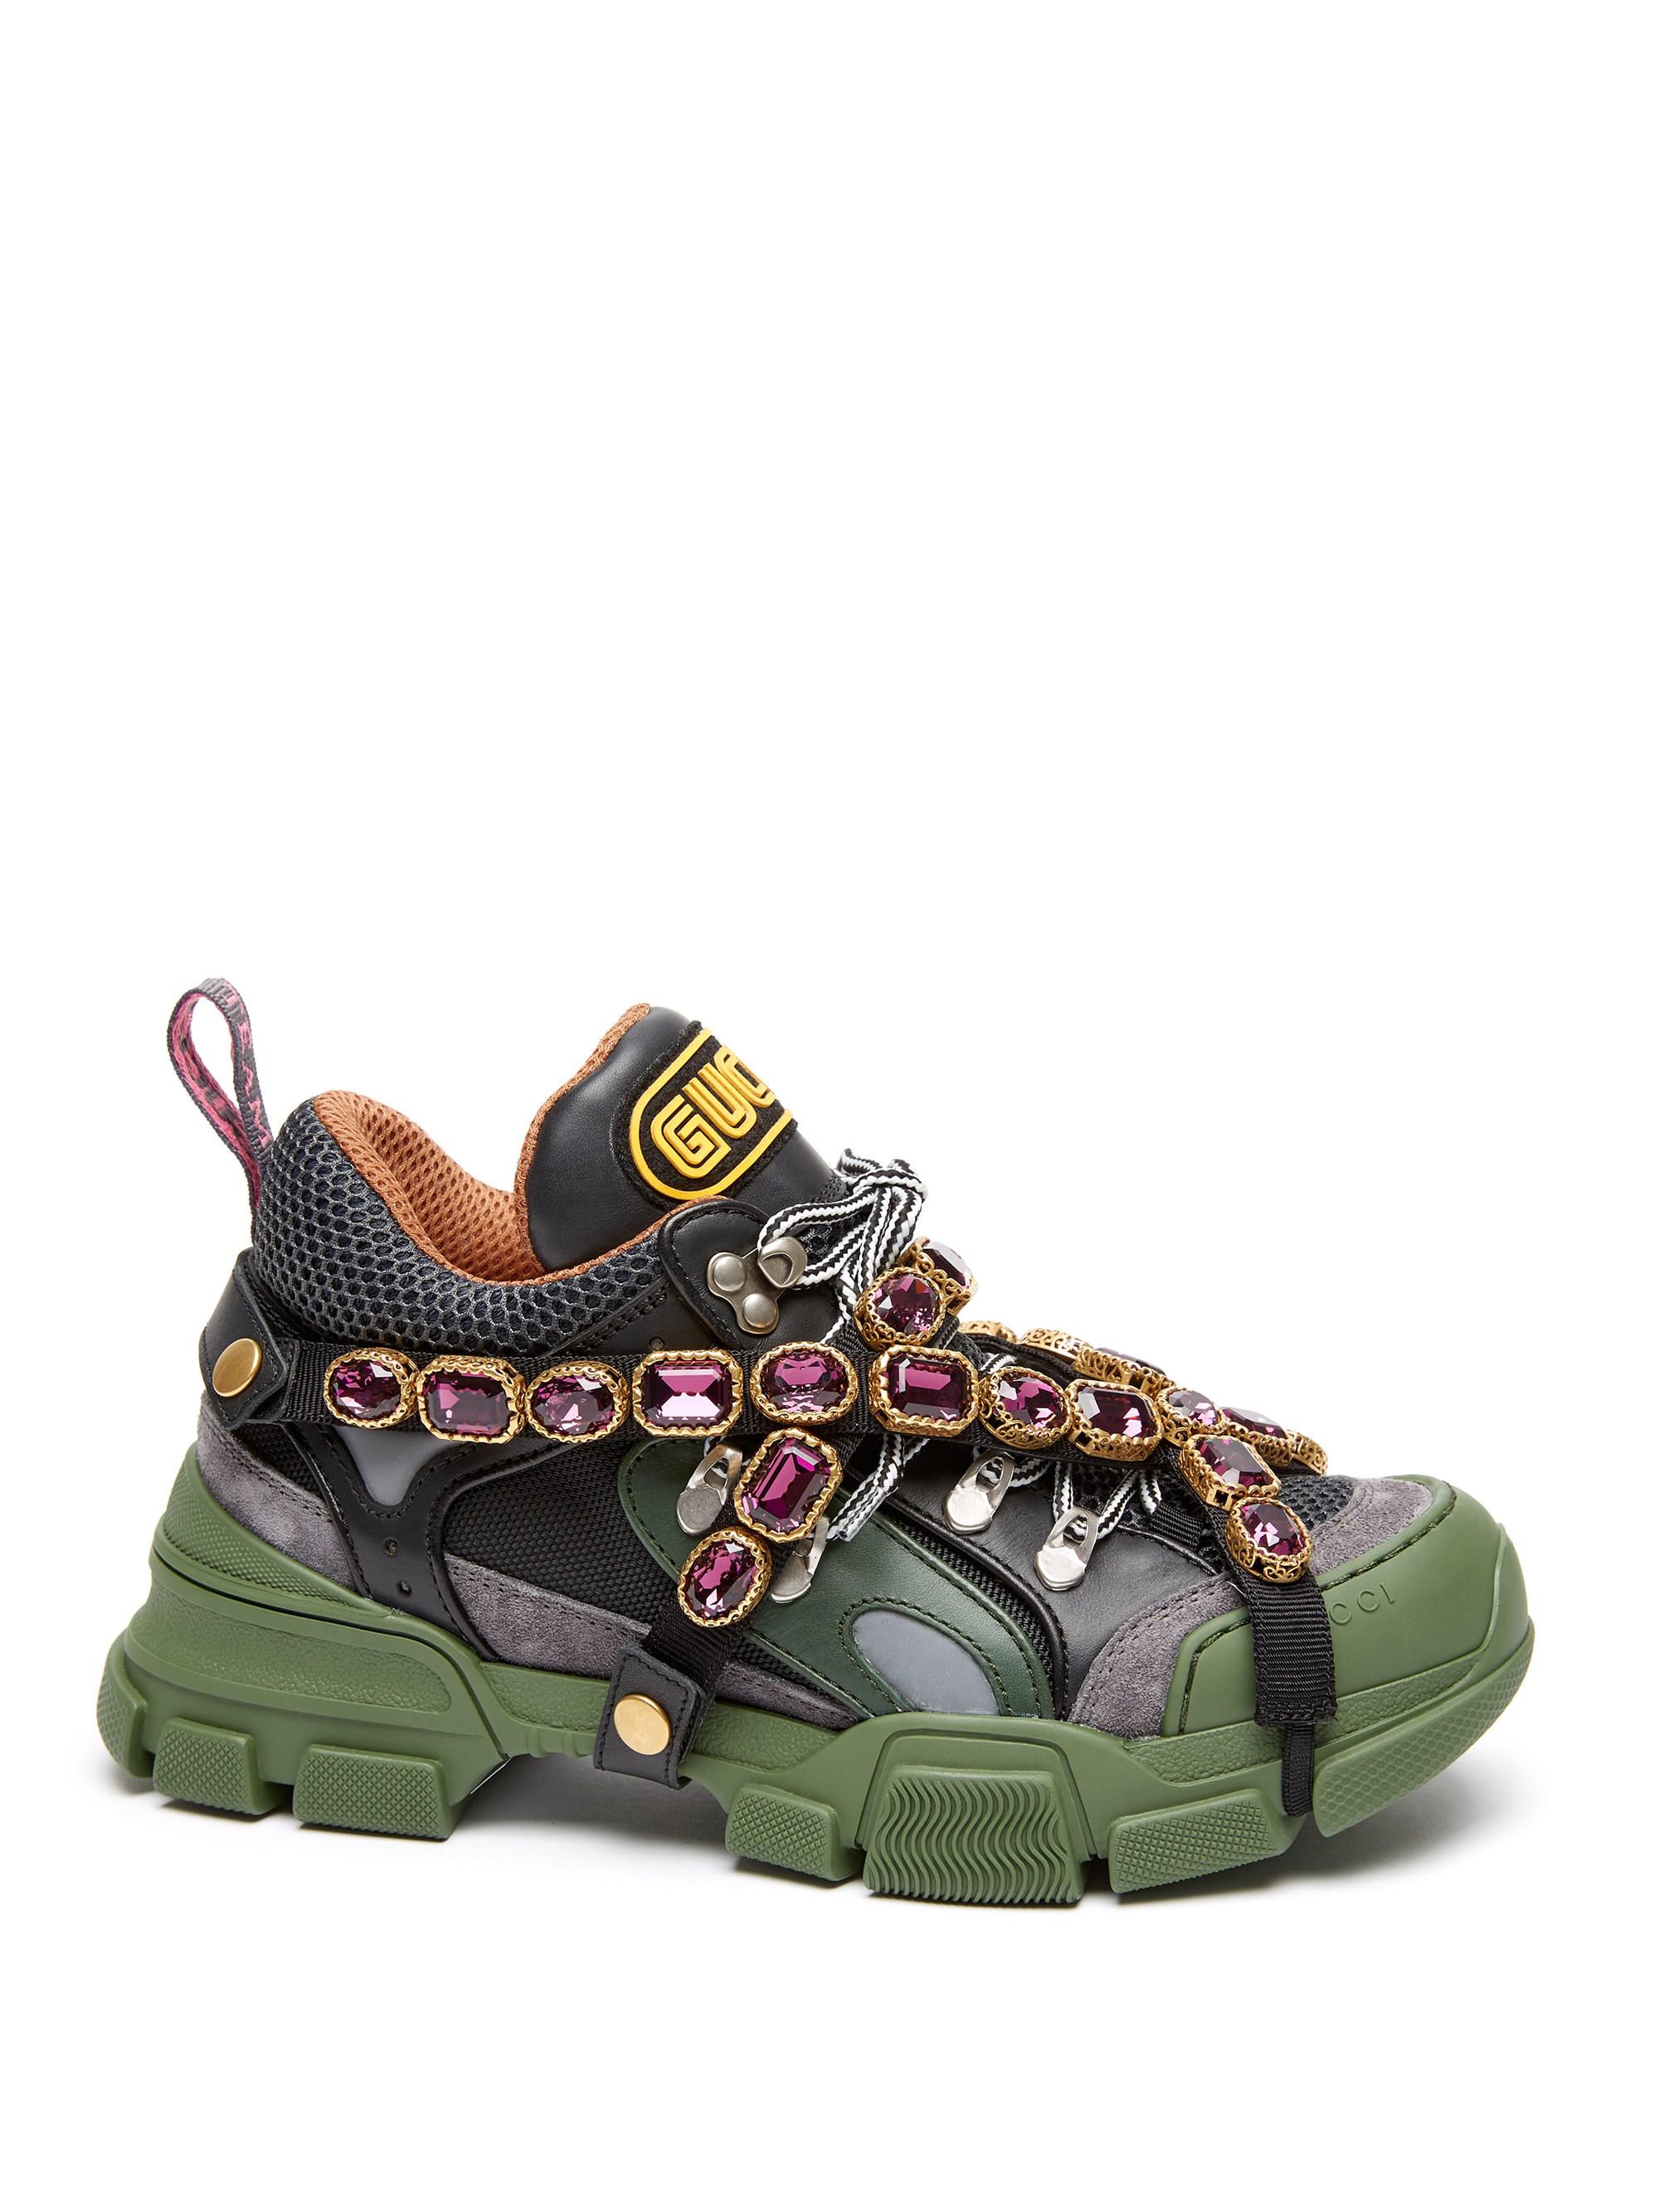 Gucci Leather Flashtrek Sneaker With Removable Crystals in Dark Green ...